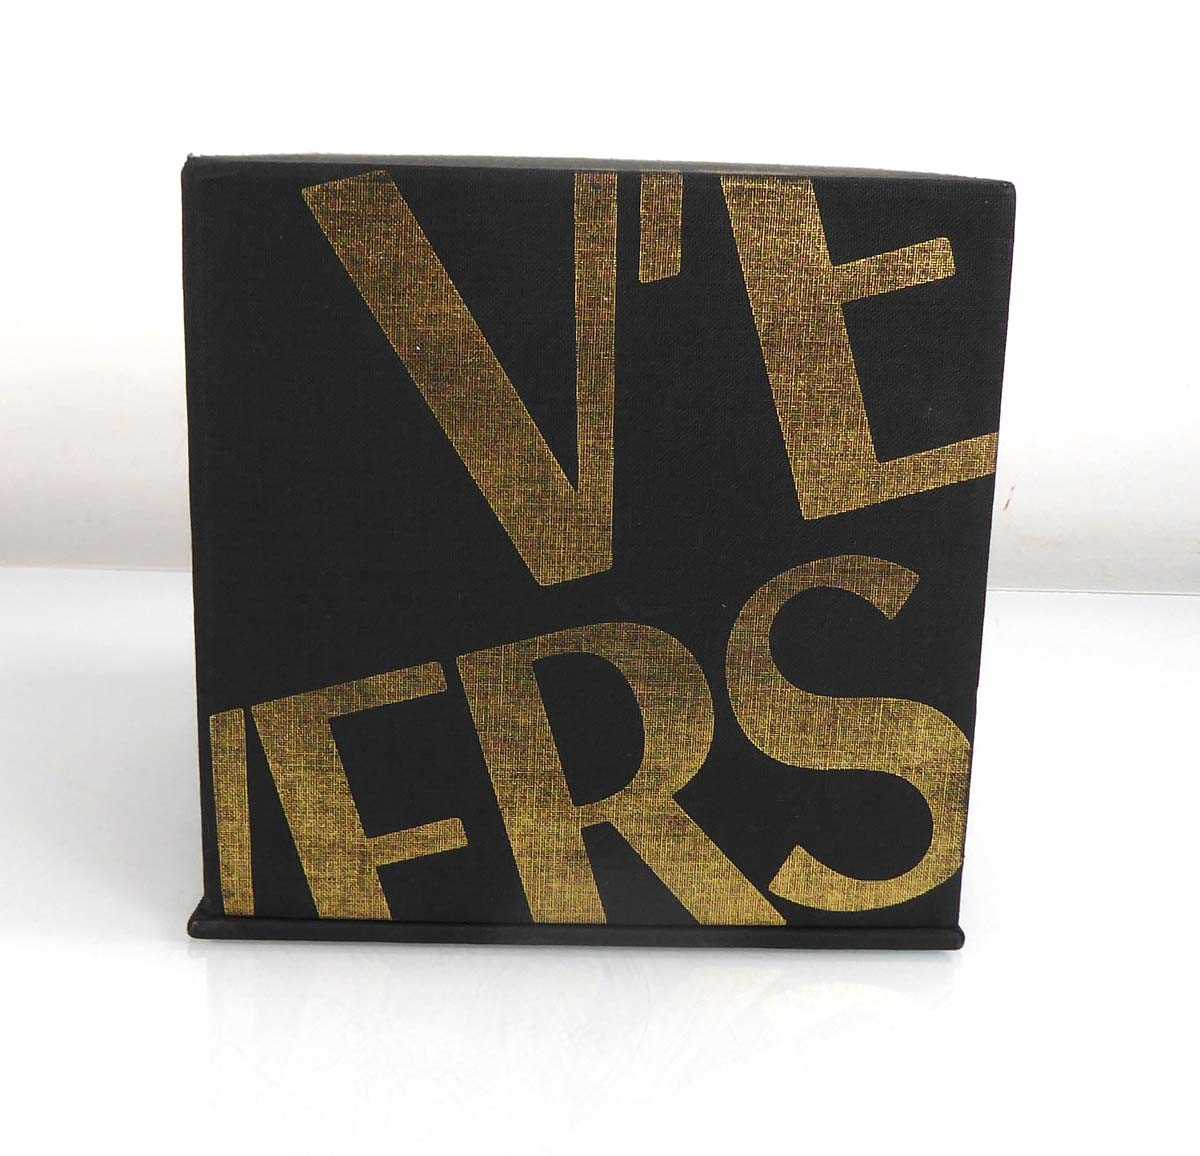 Thierry Lecoule for Versace, a limited edition 'V'E parfum' perfume bottle/cube designed in the - Image 2 of 2